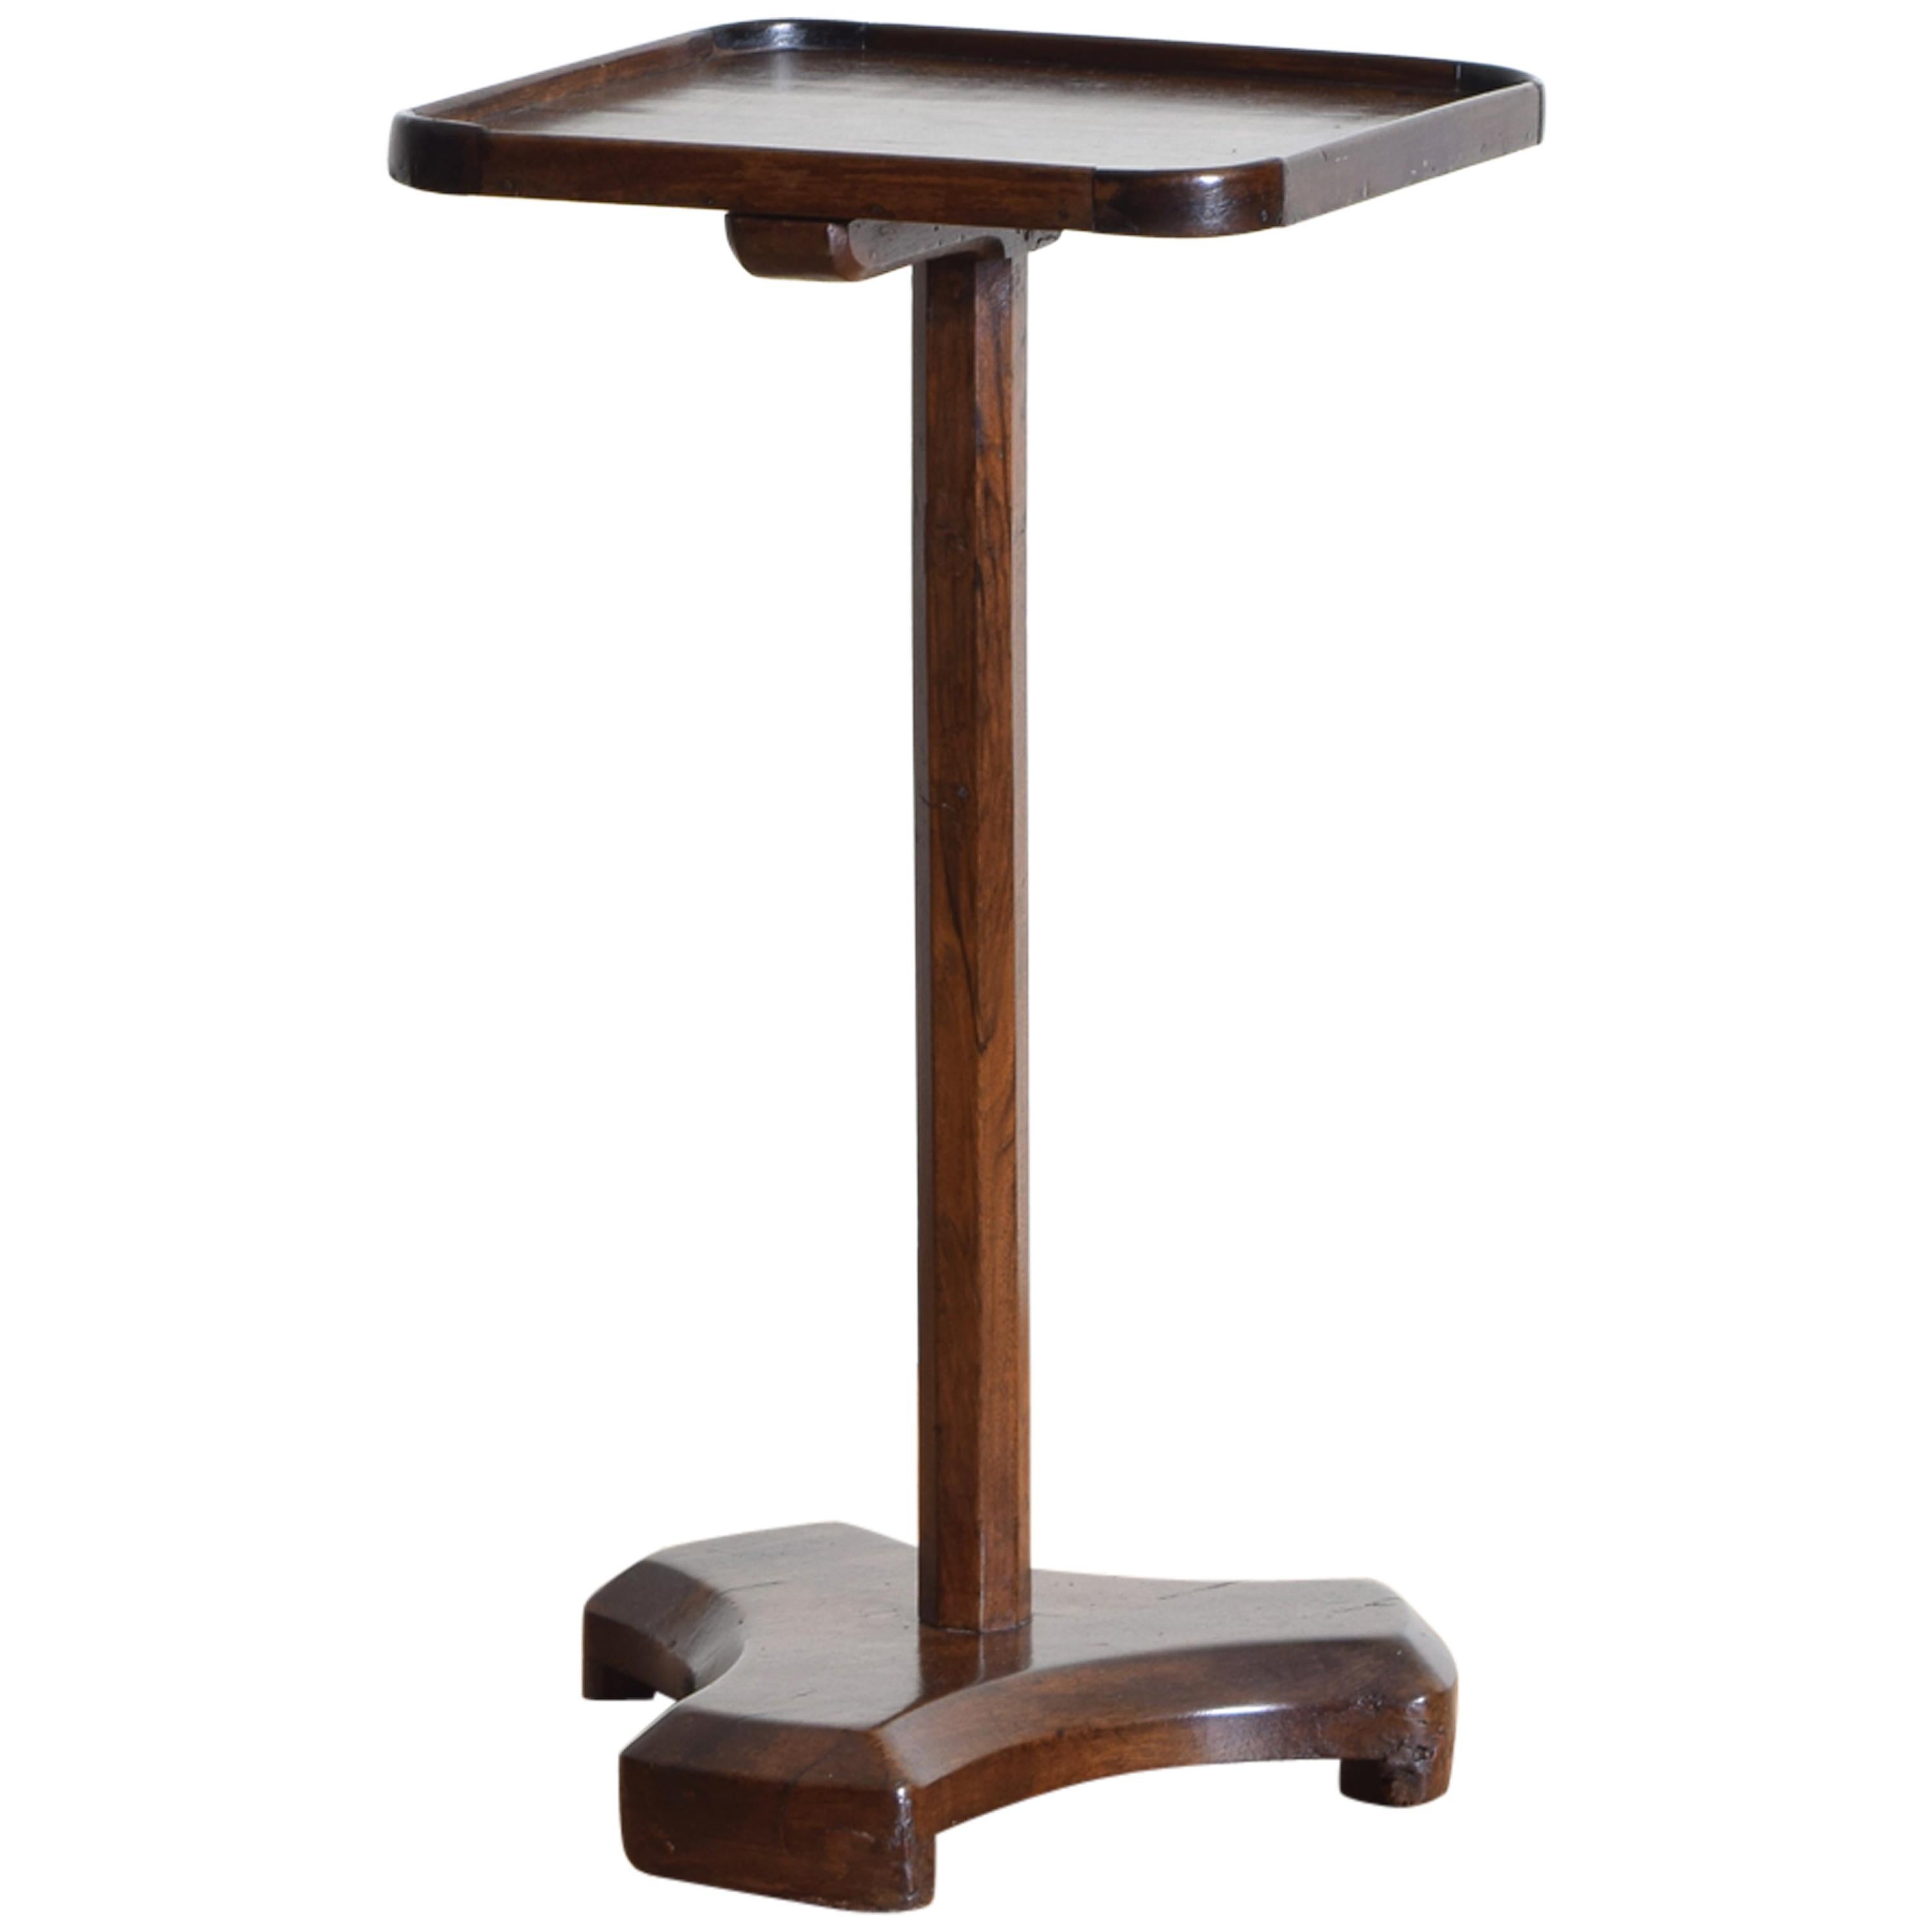 French Late Neoclassic Walnut Side Table, Mid-19th Century